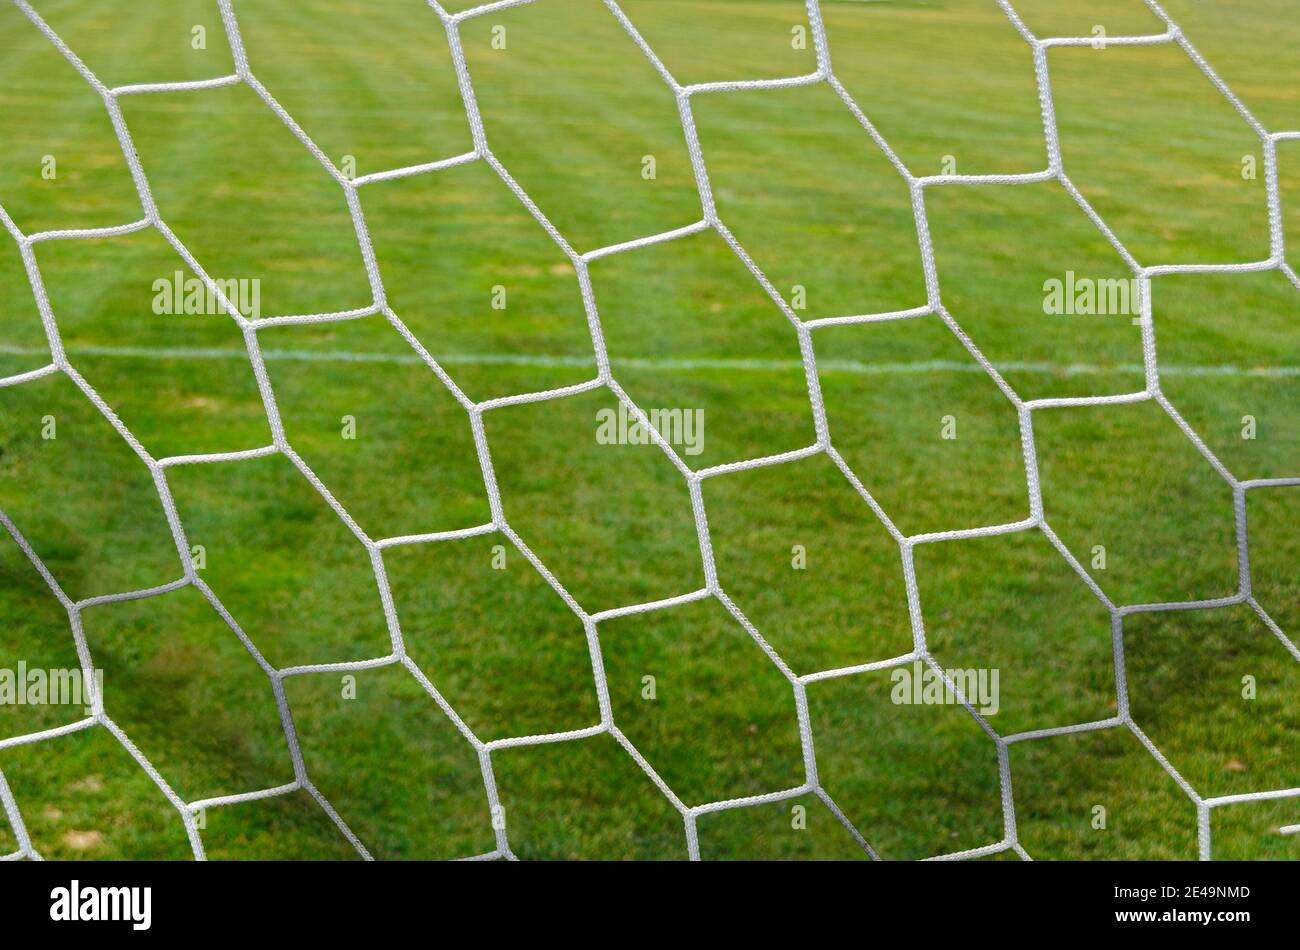 view through the net of a soccer goal with isohedral pattern onto the play ground Stock Photo